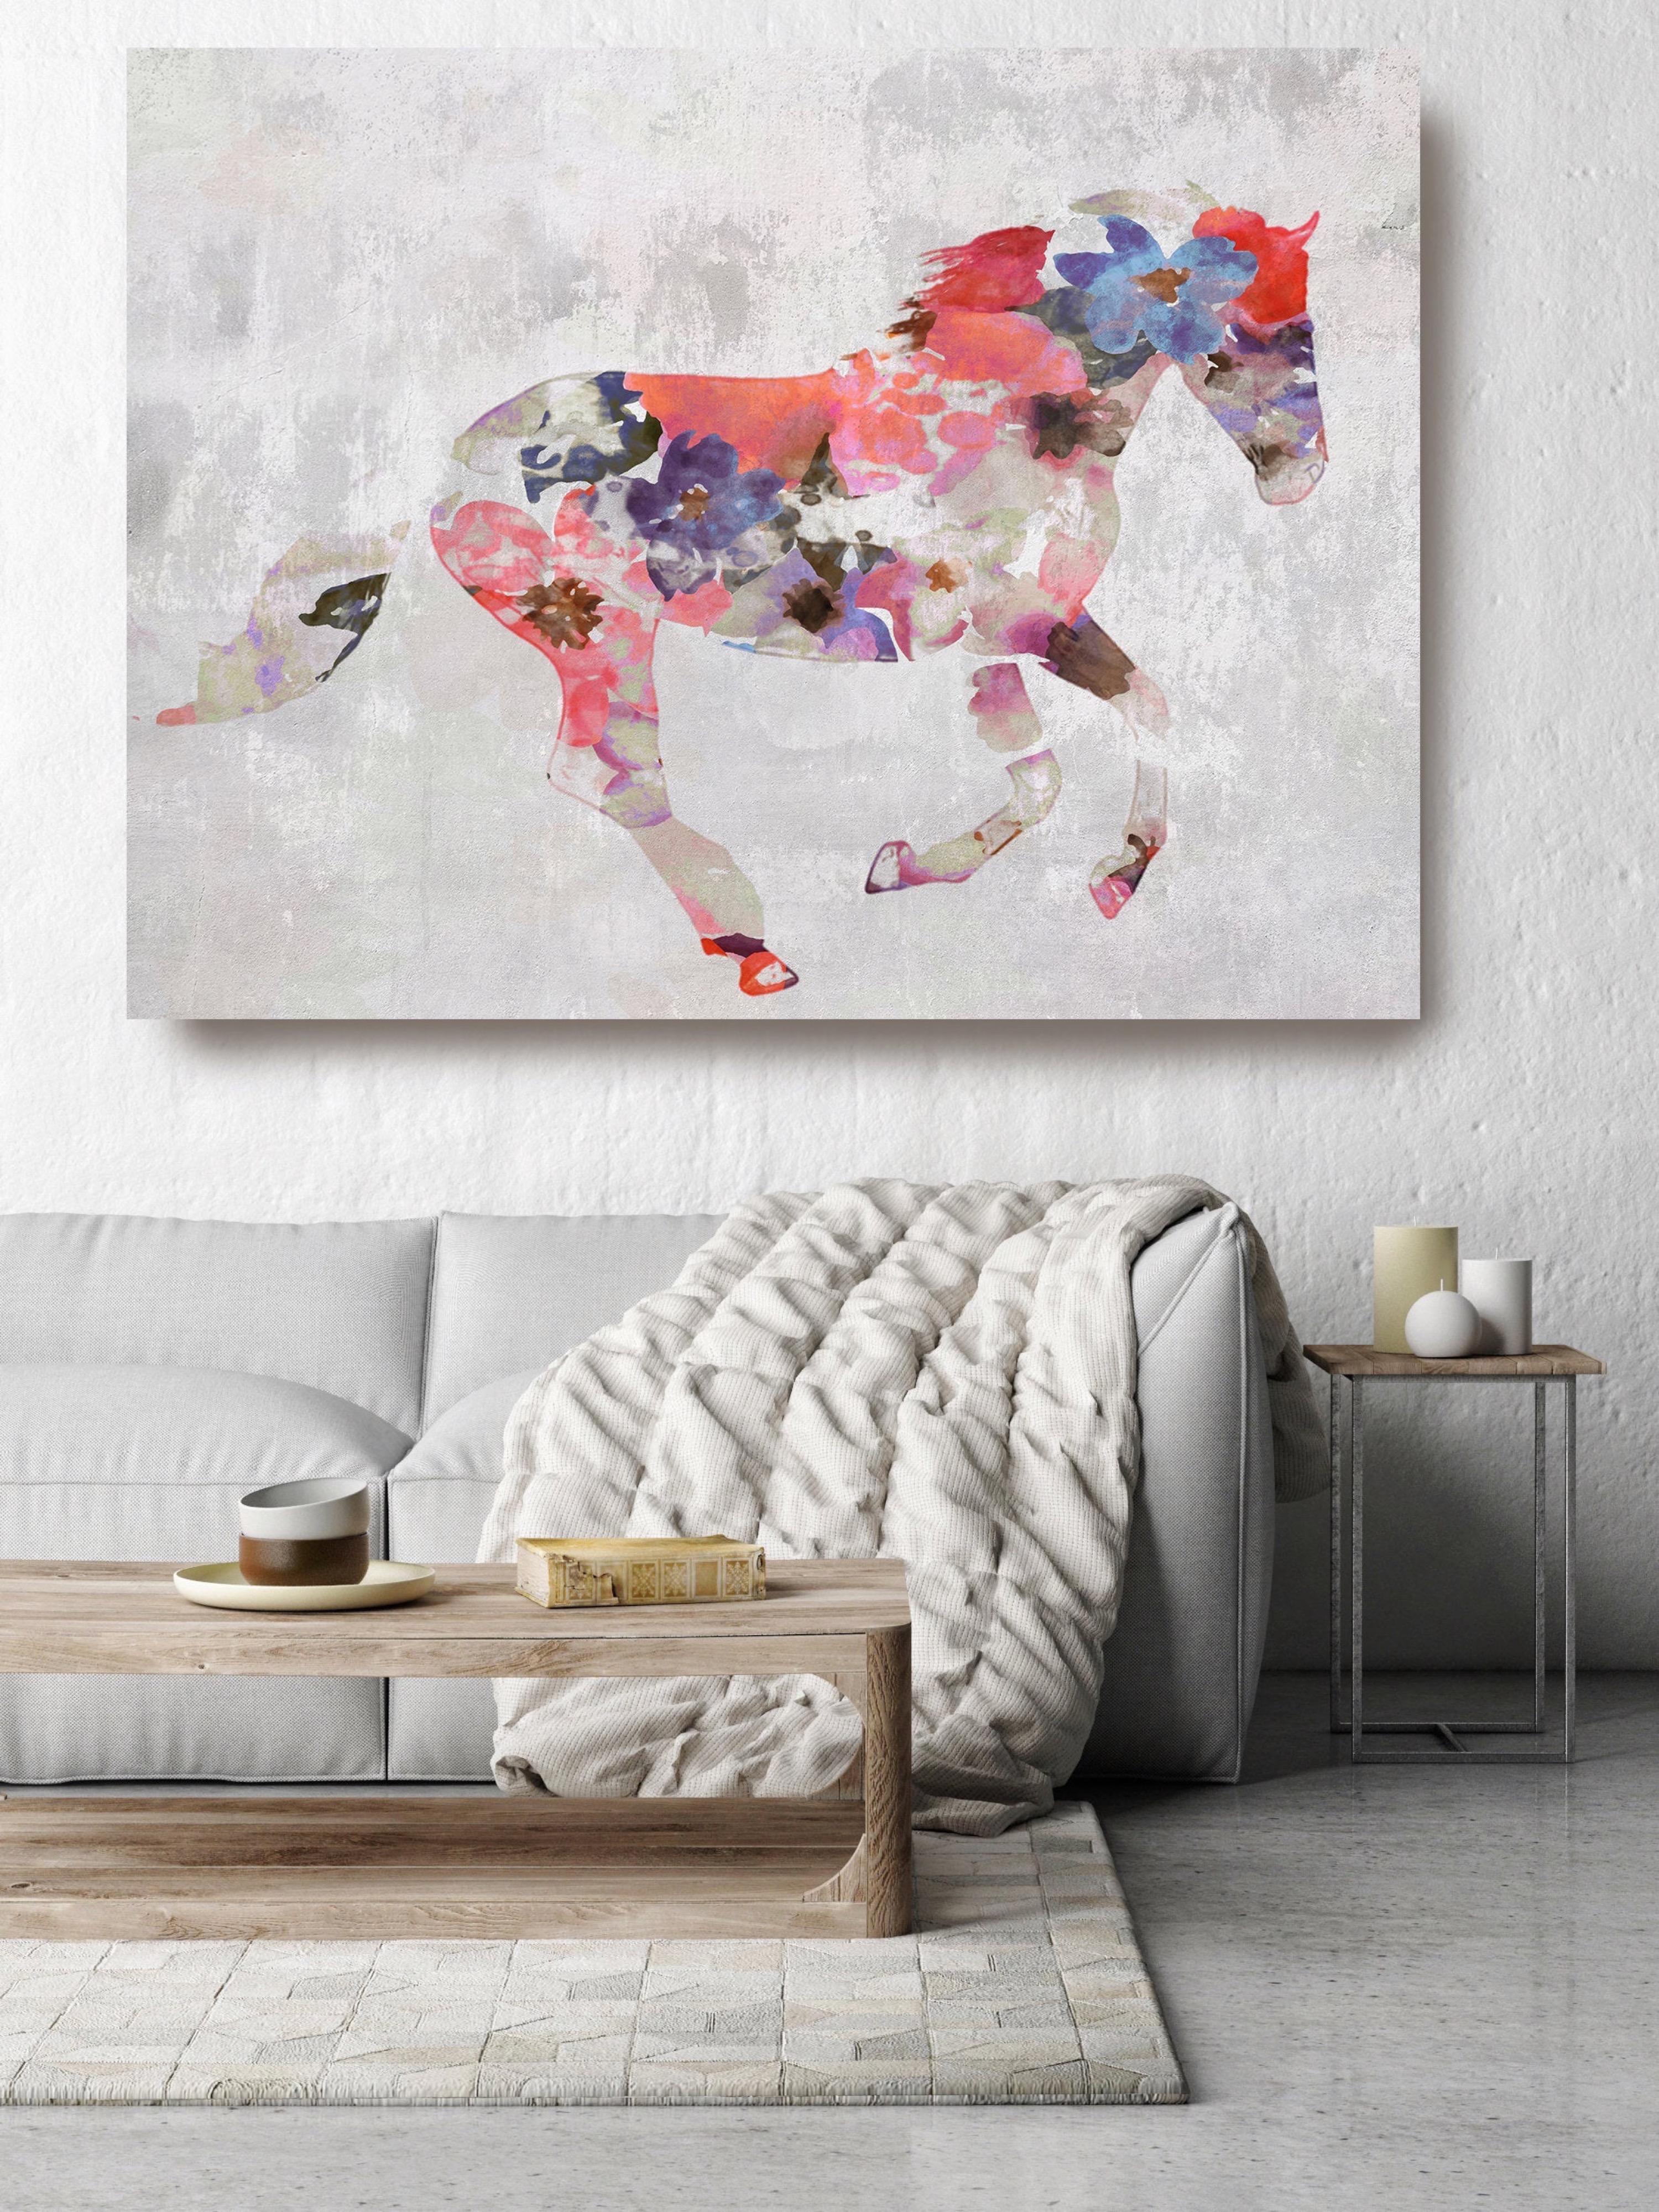 Colorful Floral Horse Painting Horse Fine Art Hand Embellished Giclee on Canvas

Collector's Edition Embellished Art Canvas Giclee With Brushstrokes and rich texture.

State-of-the-art HAND EMBELLISHED ∽ MUSEUM QUALITY ∽ DISPLAY READY Giclee